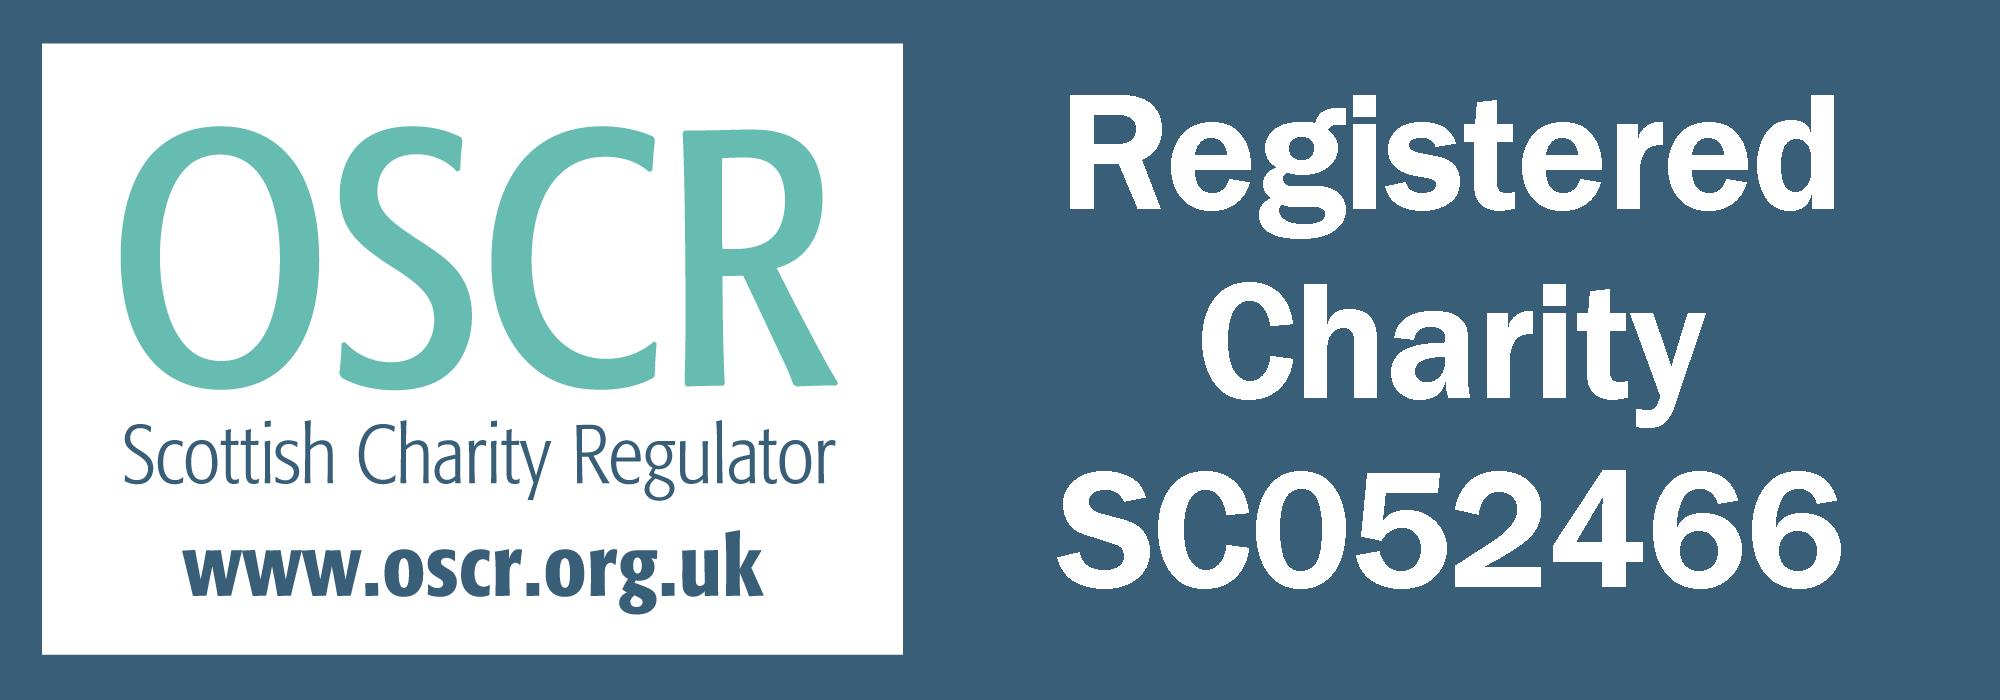 The badge we use about our registration with the Scottish Charity Regulator is blue with our charity number